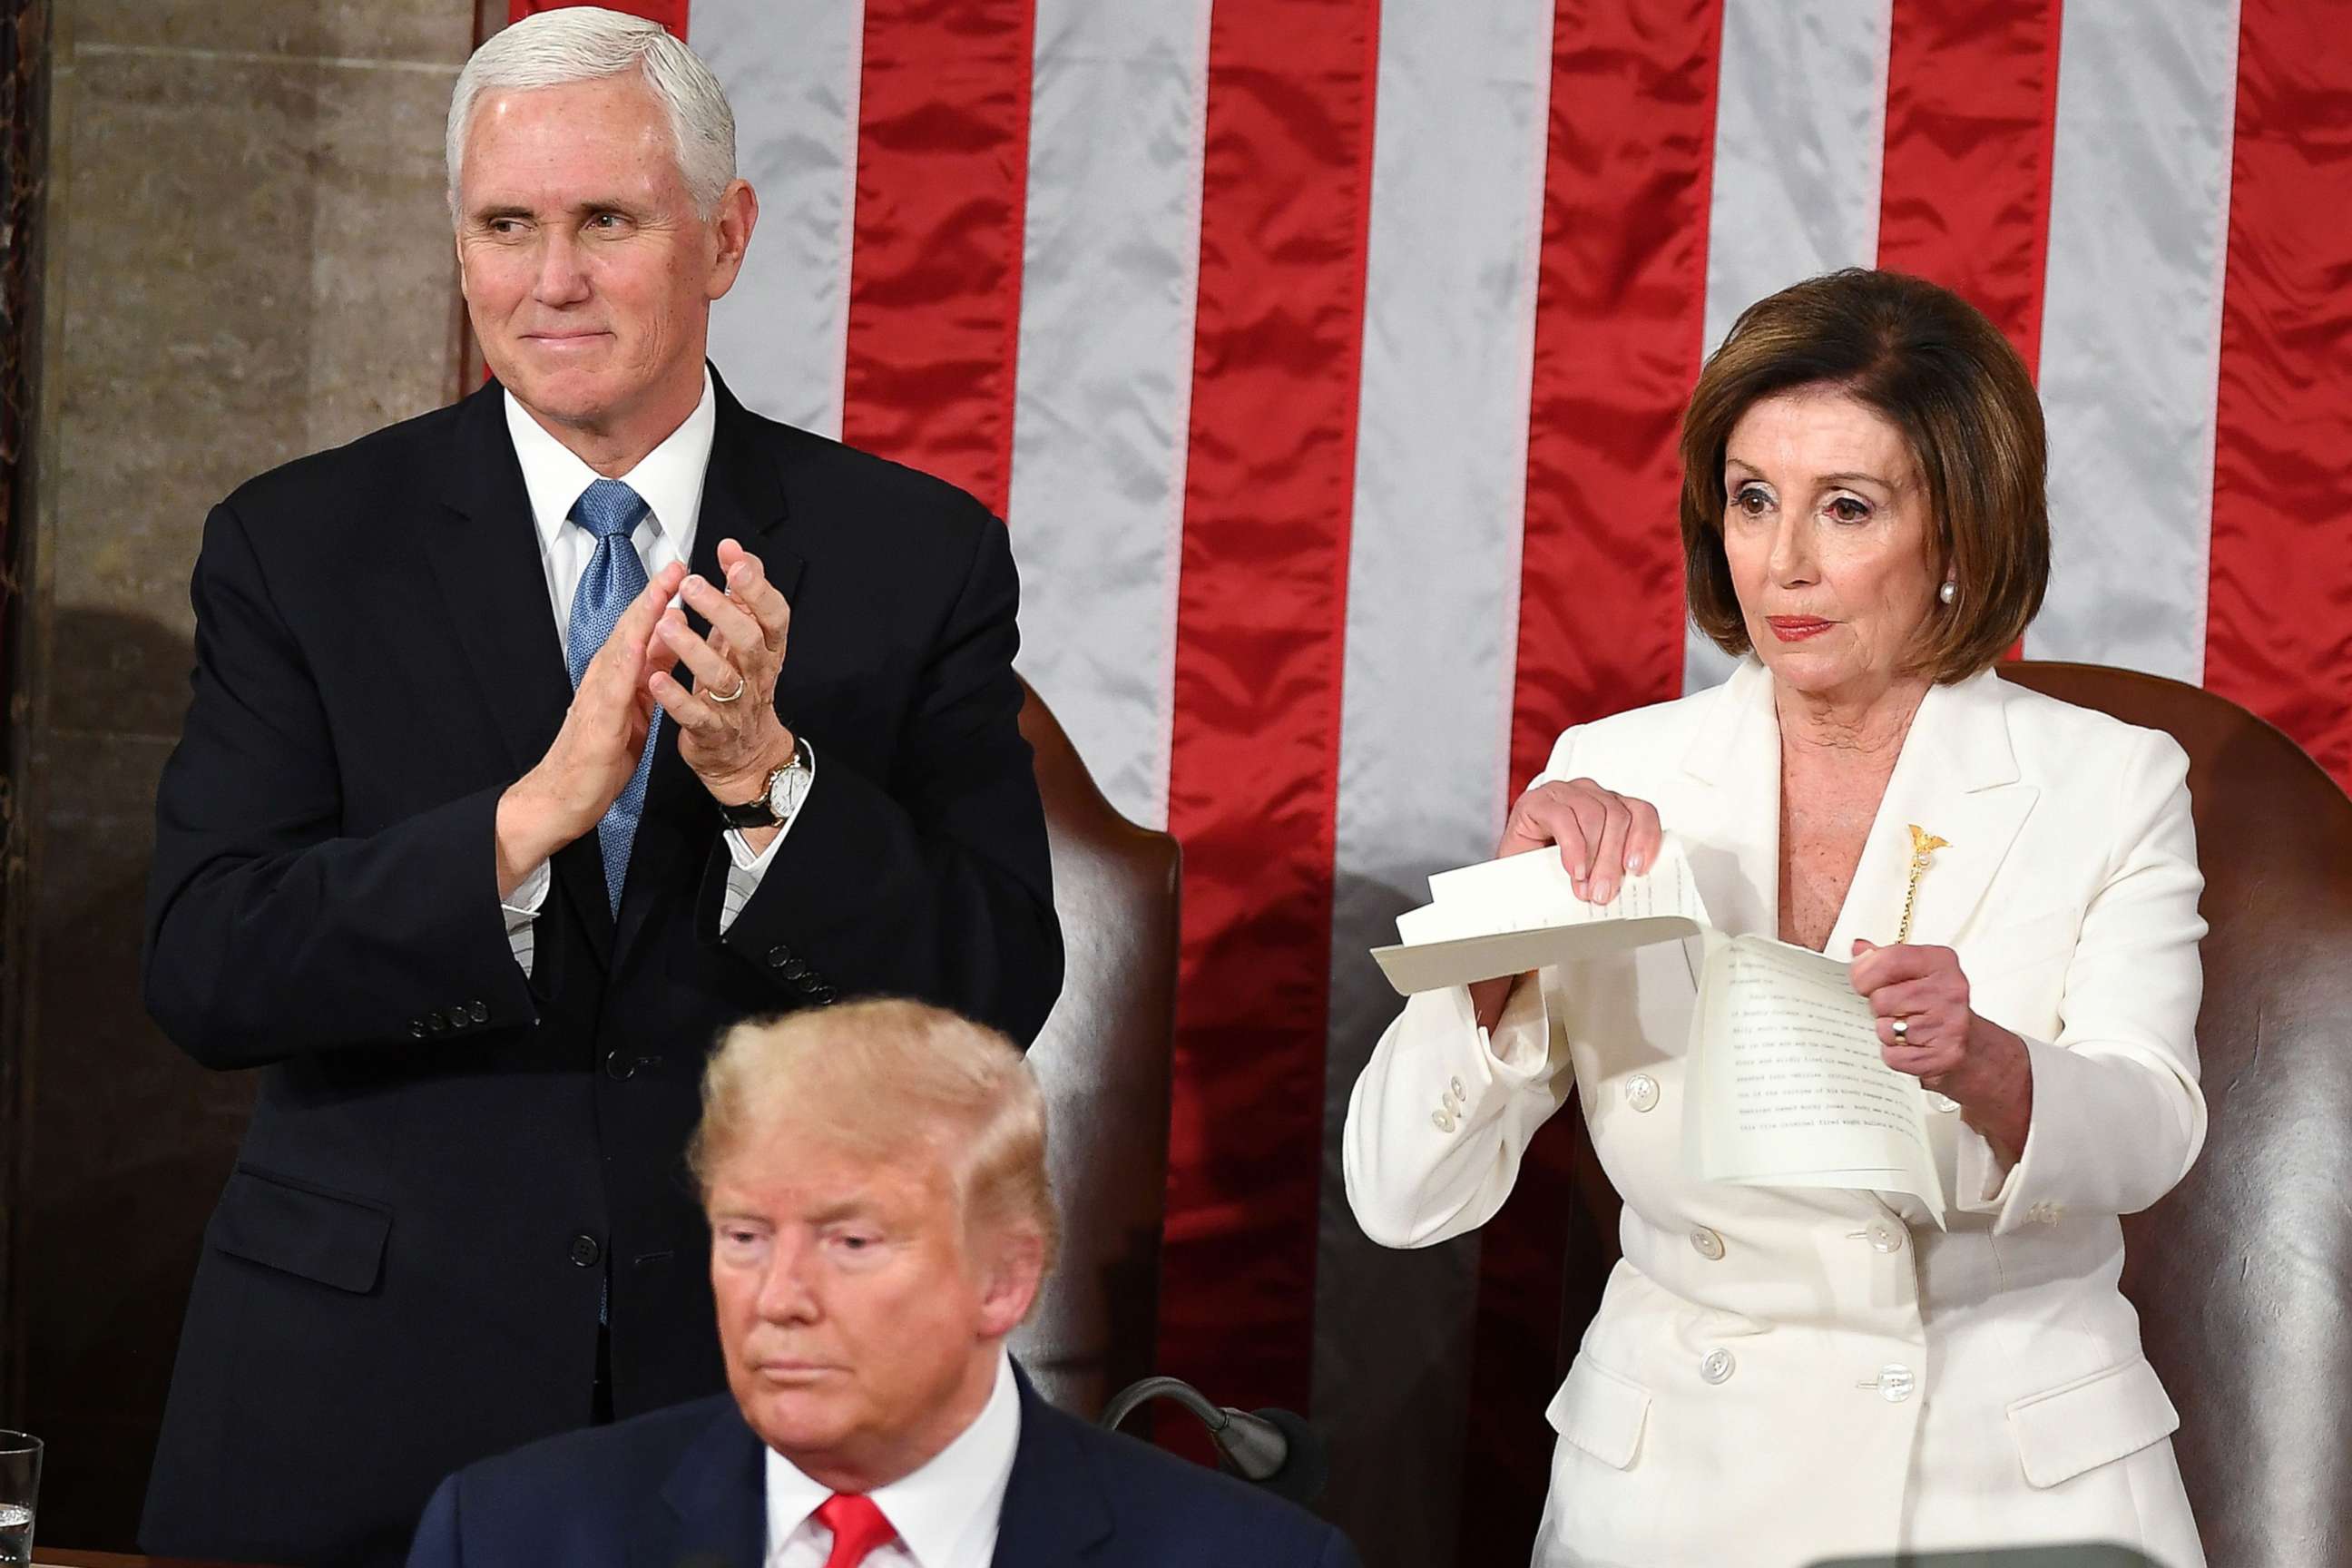 PHOTO: Vice President Mike Pence claps as Speaker of the House of Representatives Nancy Pelosi rips a copy of President Donald Trump's speech after he delivered the State of the Union address at the U.S. Capitol in Washington, D.C., Feb. 4.